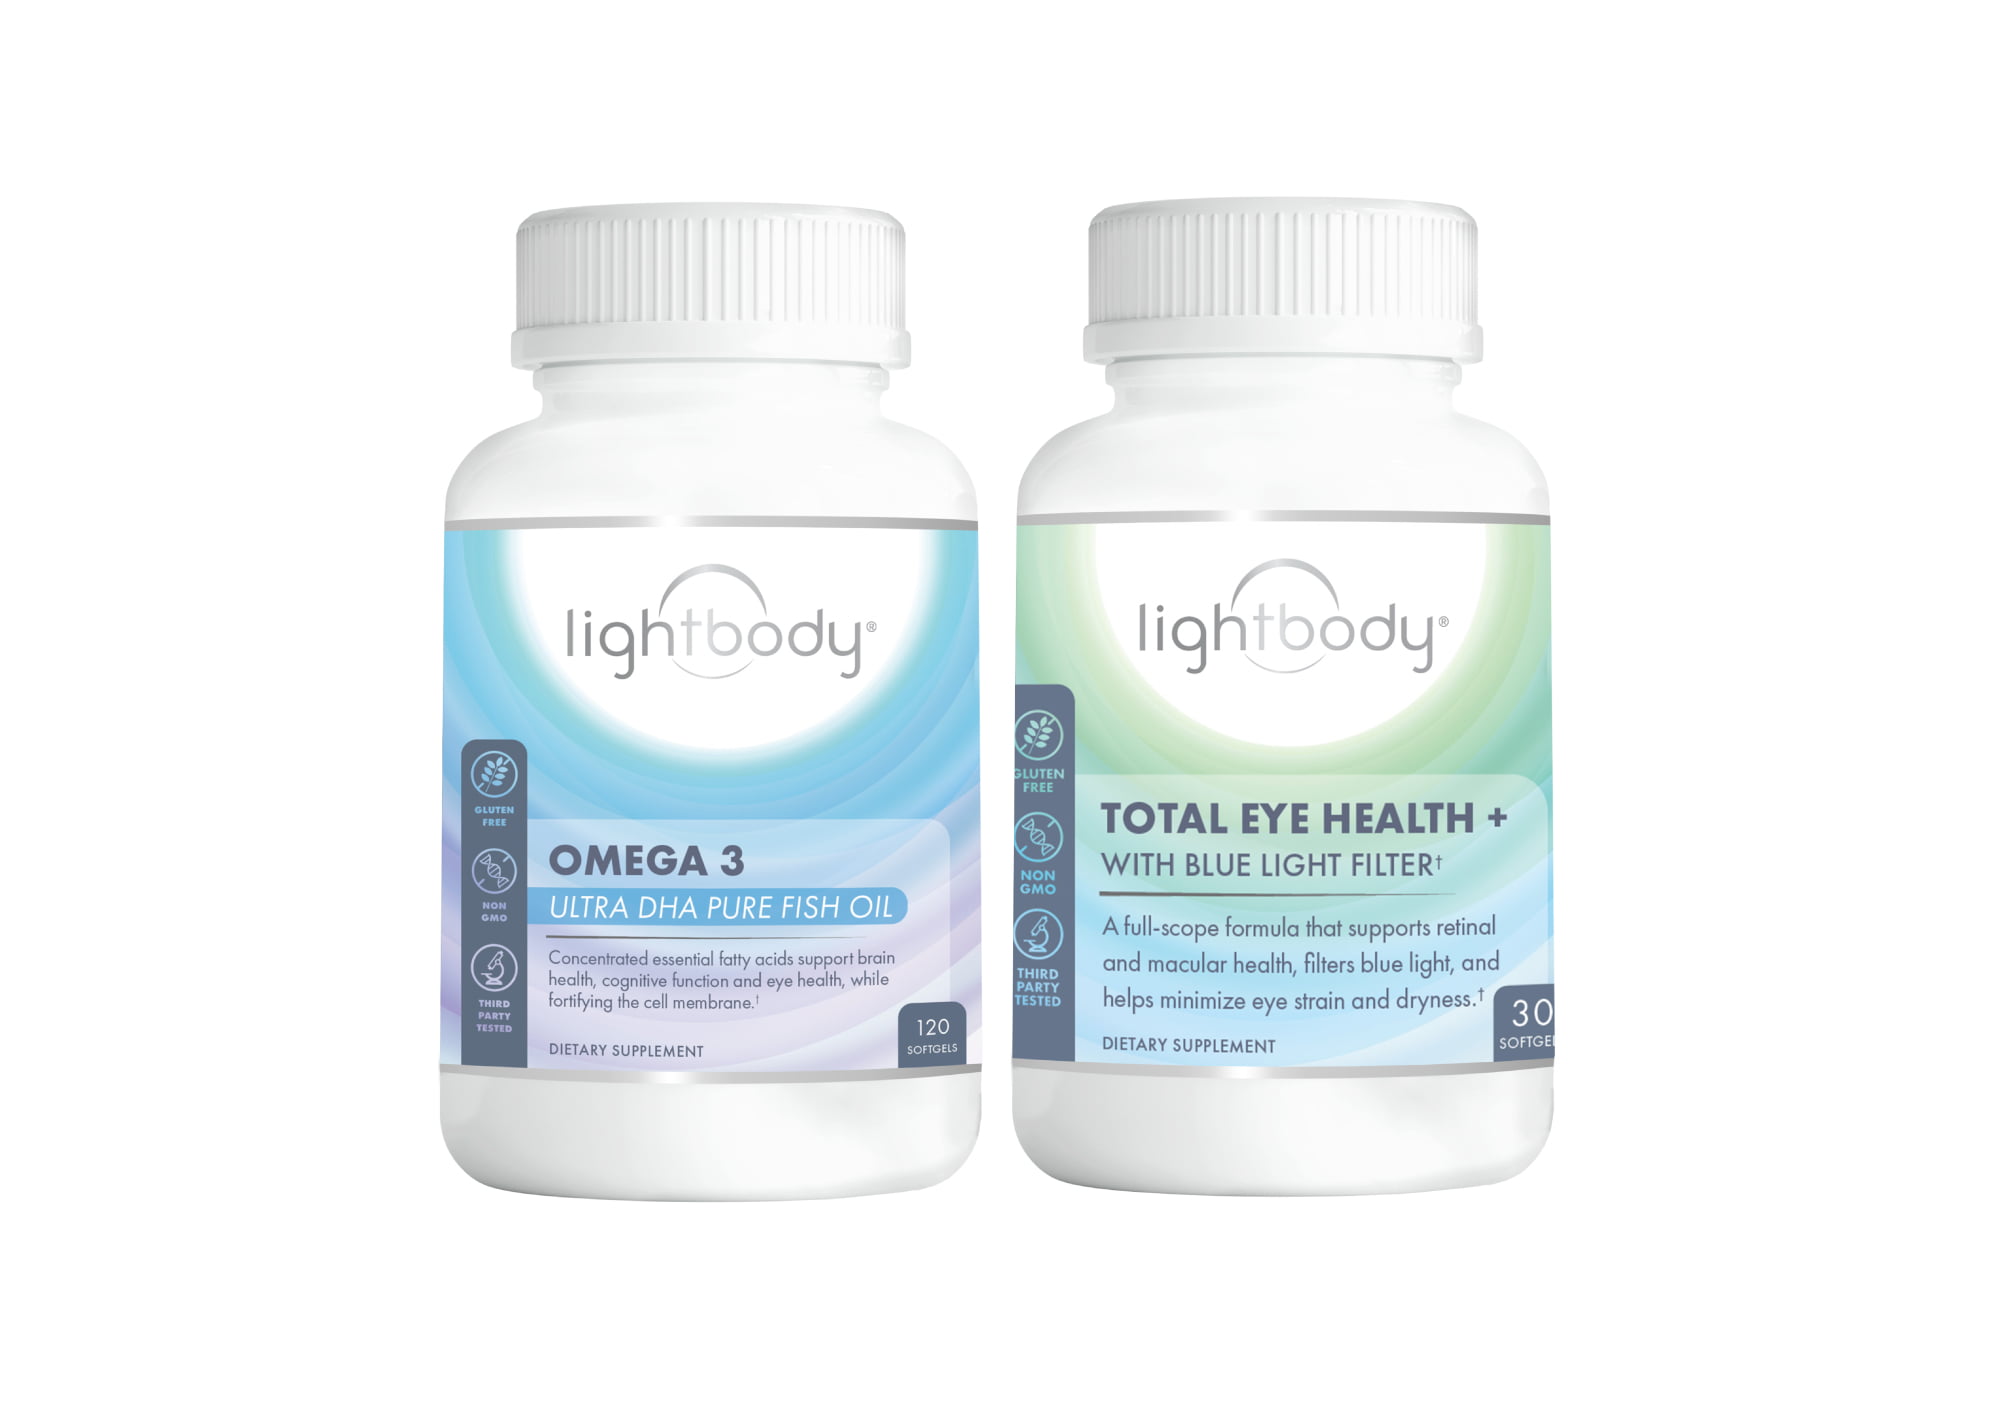 Two bottles of dietary supplements recommended for maintaining eye health are displayed. The first is labeled "Lightbody Total Eye Health + Blue Light Filter," and the second is "Lightbody Omega-3 DHA."